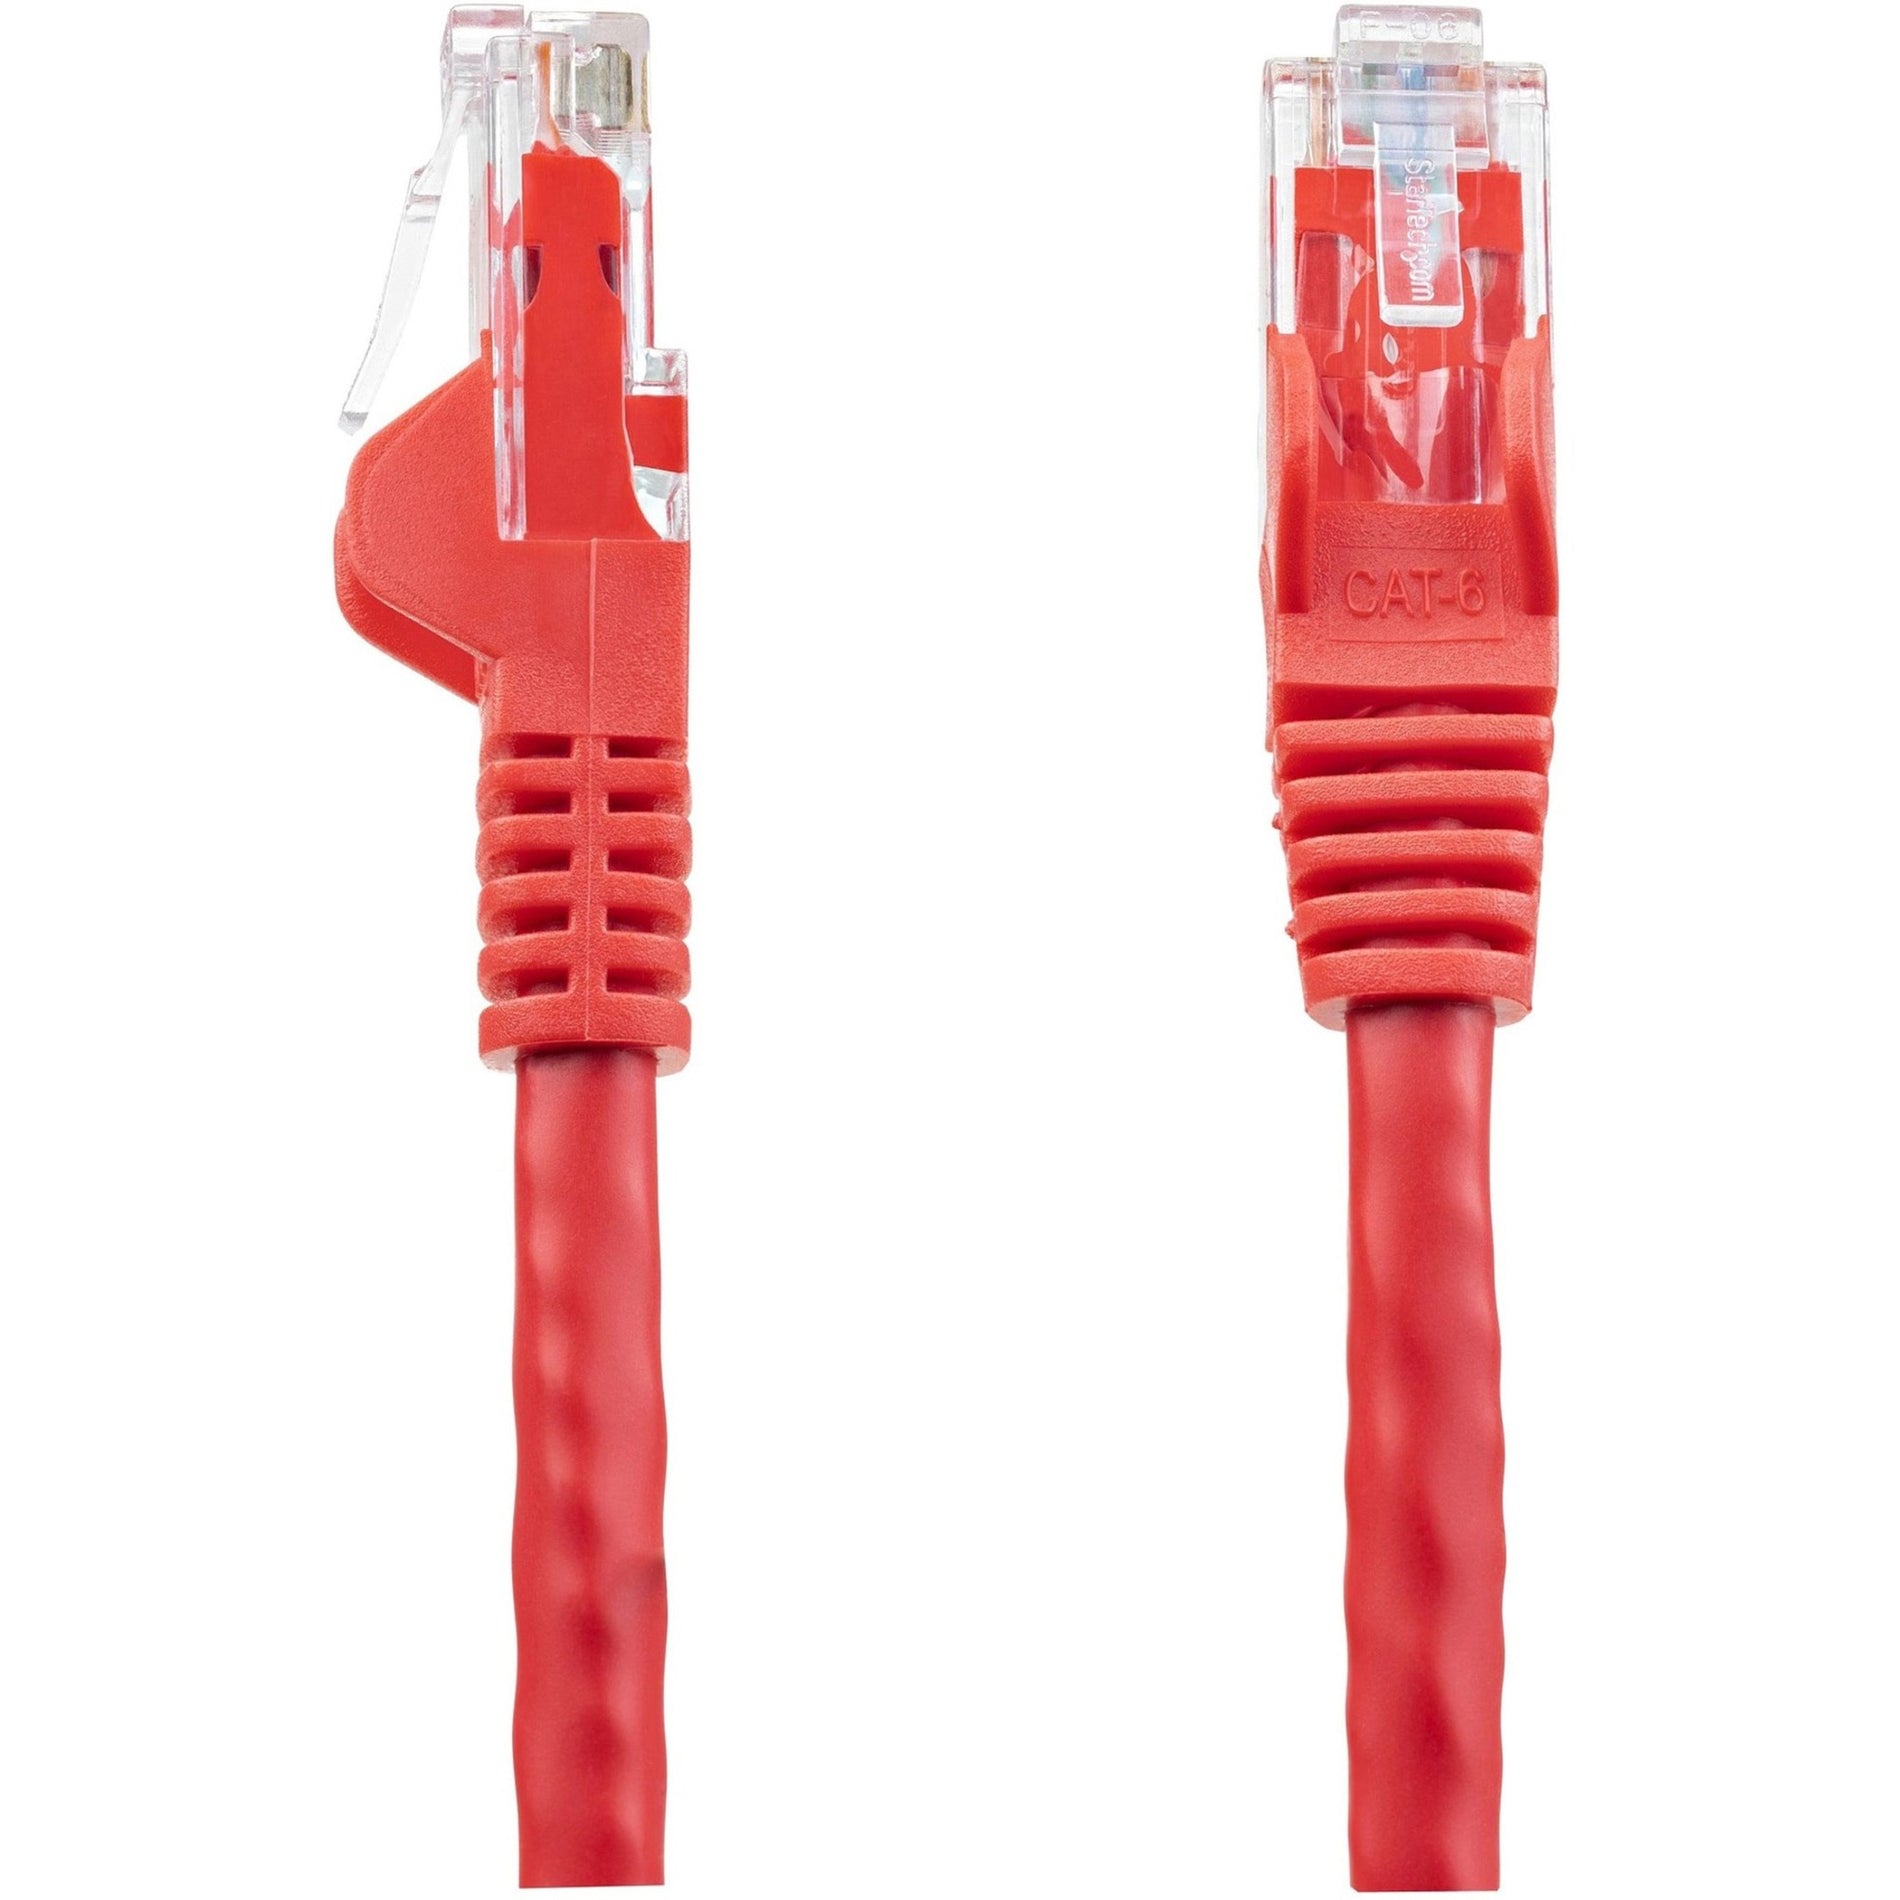 StarTech.com N6PATCH100RD 100 ft Red Snagless Cat6 UTP Patch Cable, 10 Gbit/s Data Transfer Rate, Strain Relief